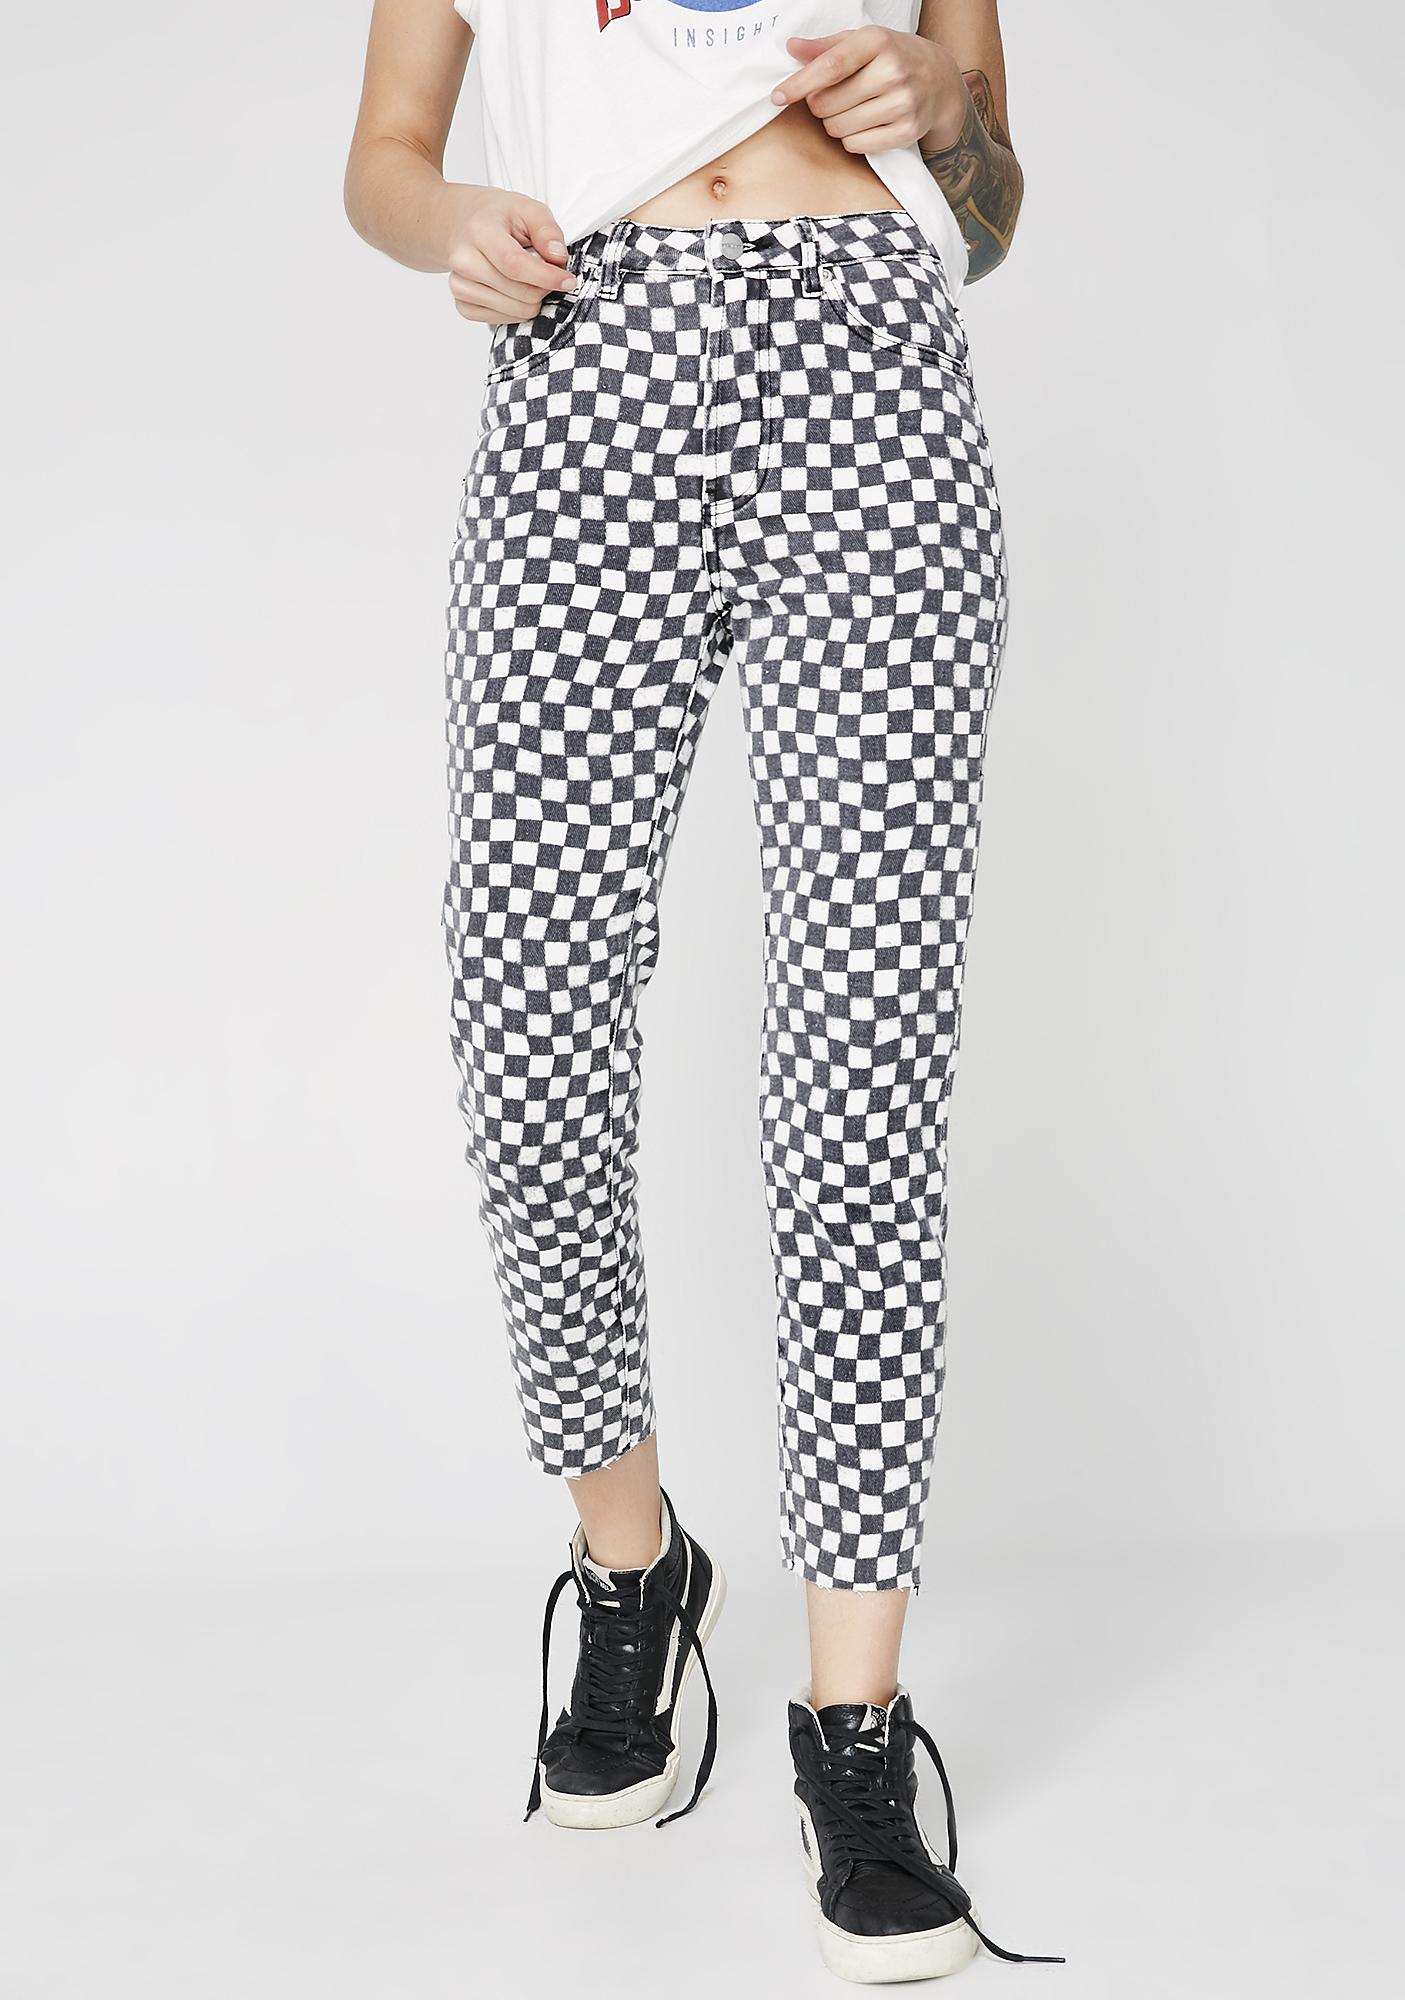 black and white checkered jeans